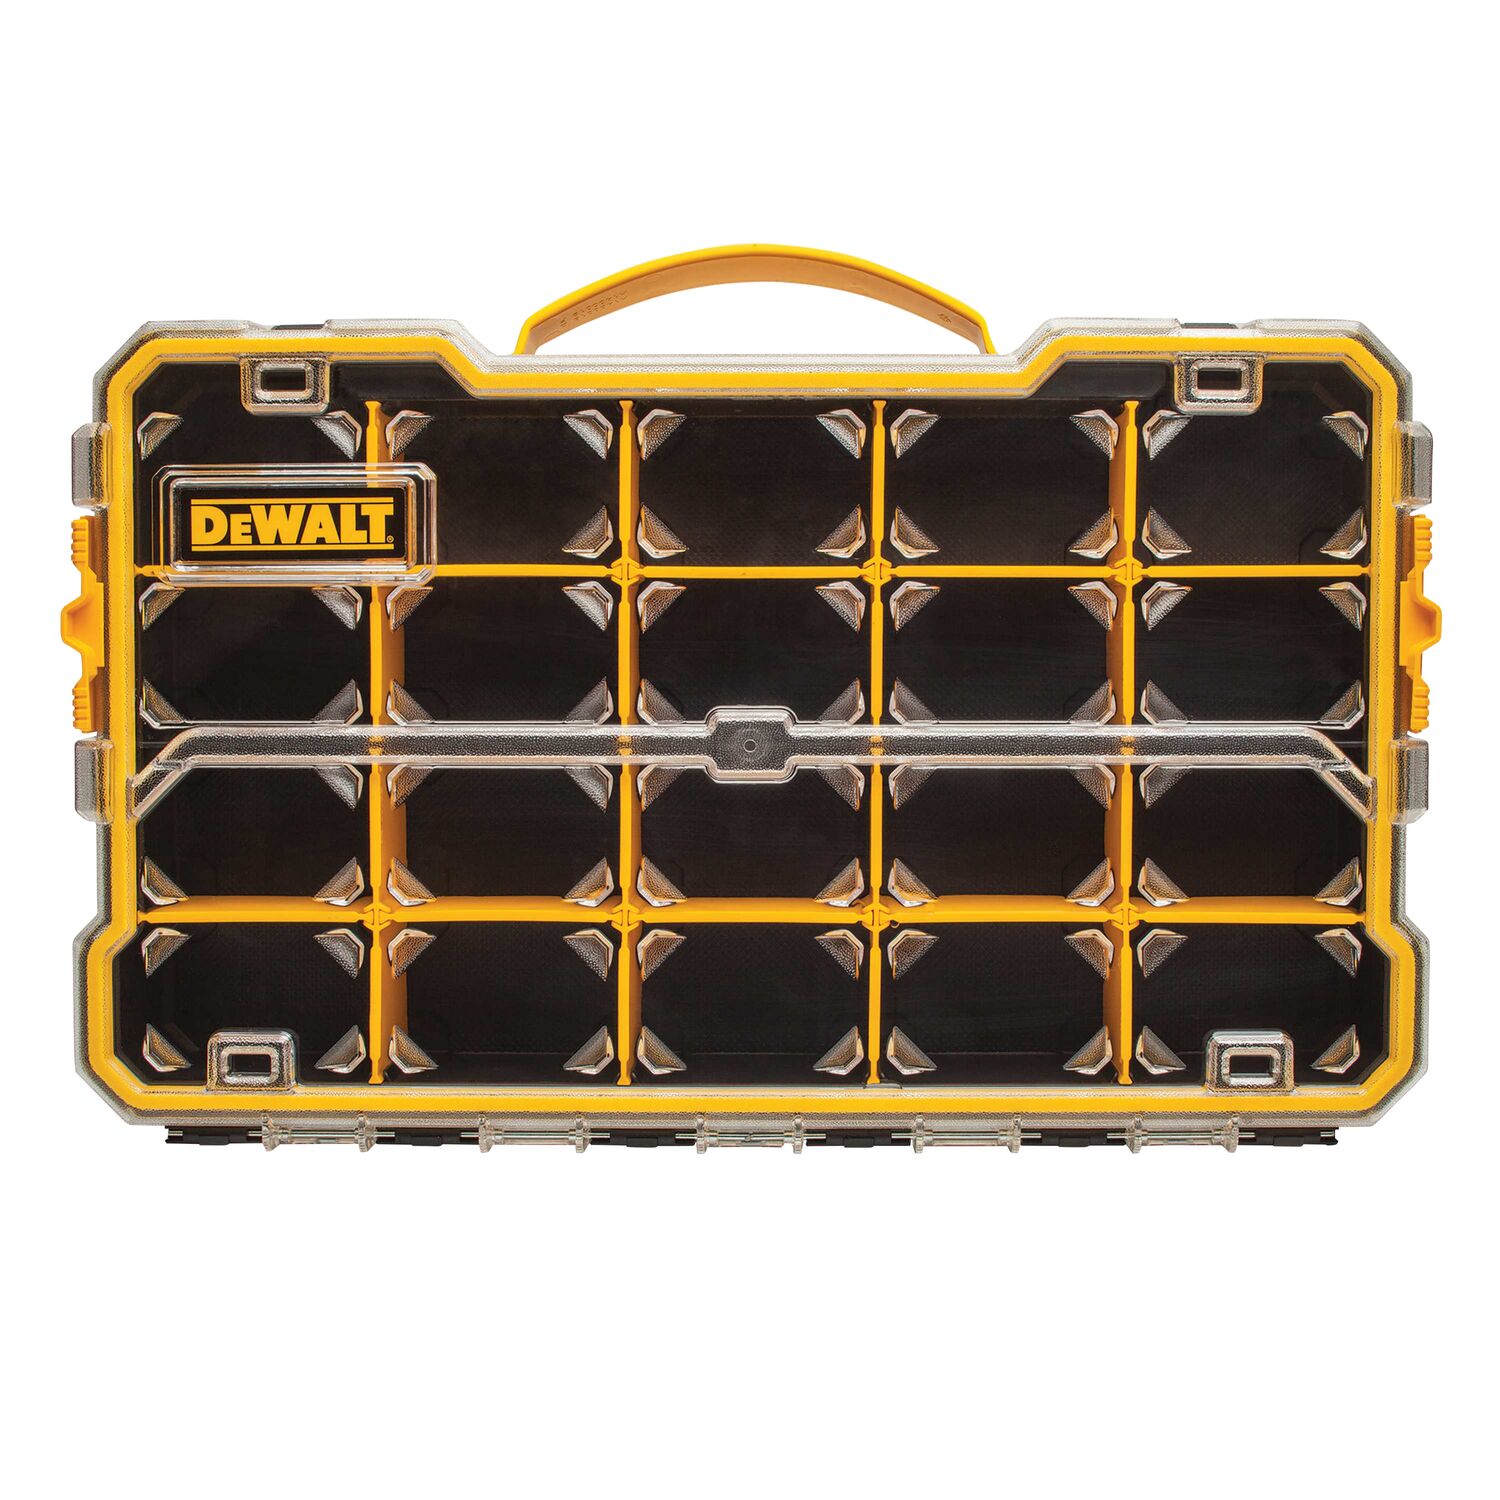 DEWALT 20 Compartment Pro Organizer with Seal - Contractor Cave Tools